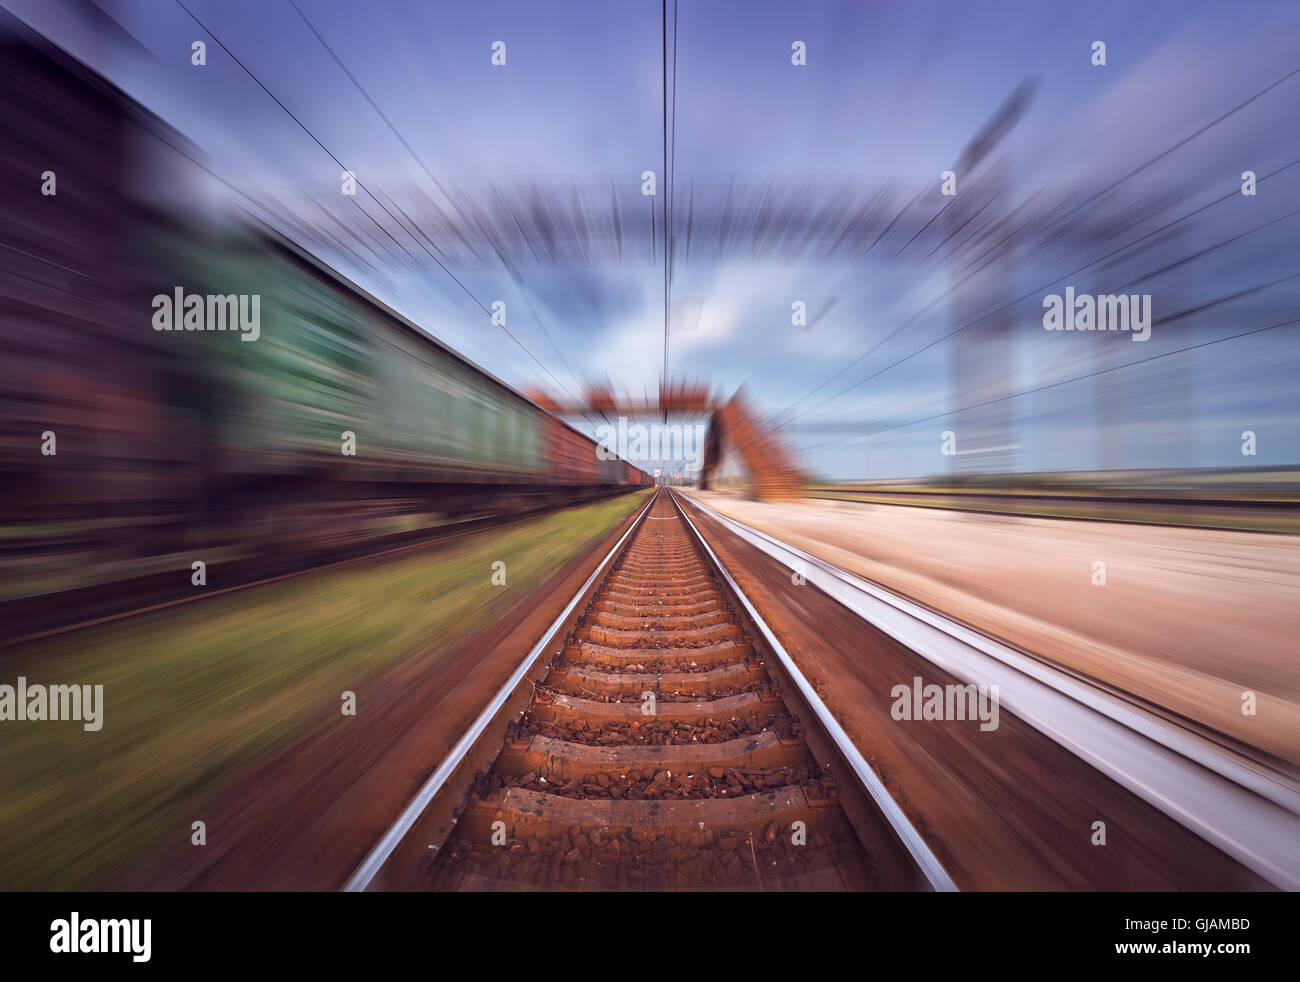 Railway station with cargo wagons in motion at sunset. Railroad with motion blur effect. Railway platform at dusk. Stock Photo